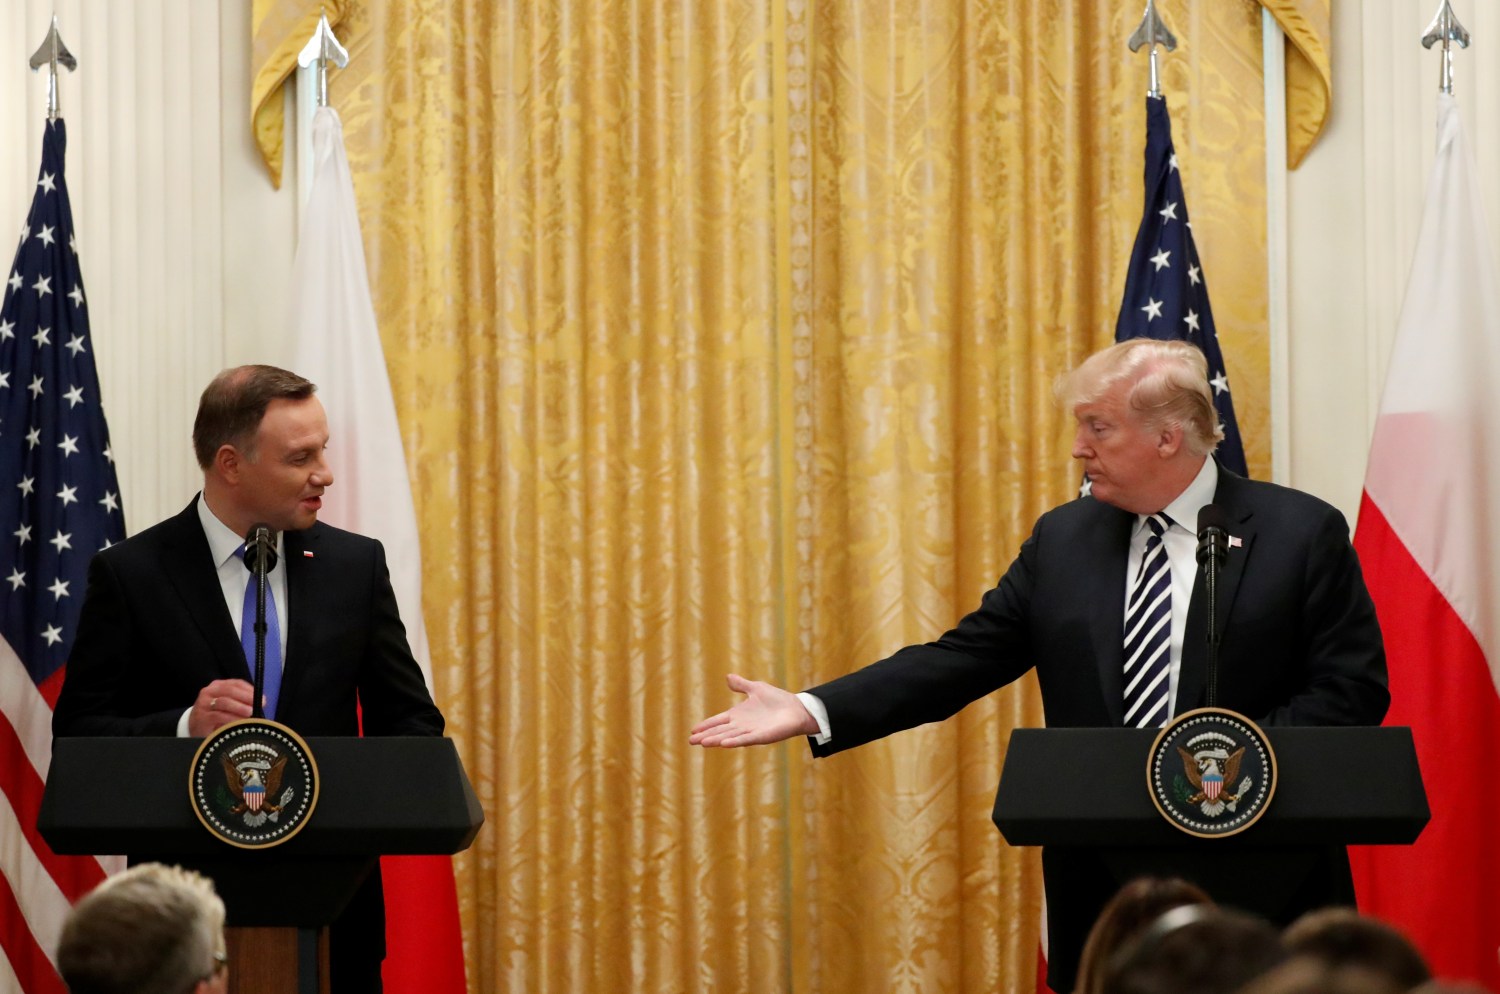 U.S. President Donald Trump welcomes Poland's President Andrzej Duda at the start of a joint news conference in the East Room of the White House in Washington, U.S., September 18, 2018. REUTERS/Kevin Lamarque - RC12E361CE10